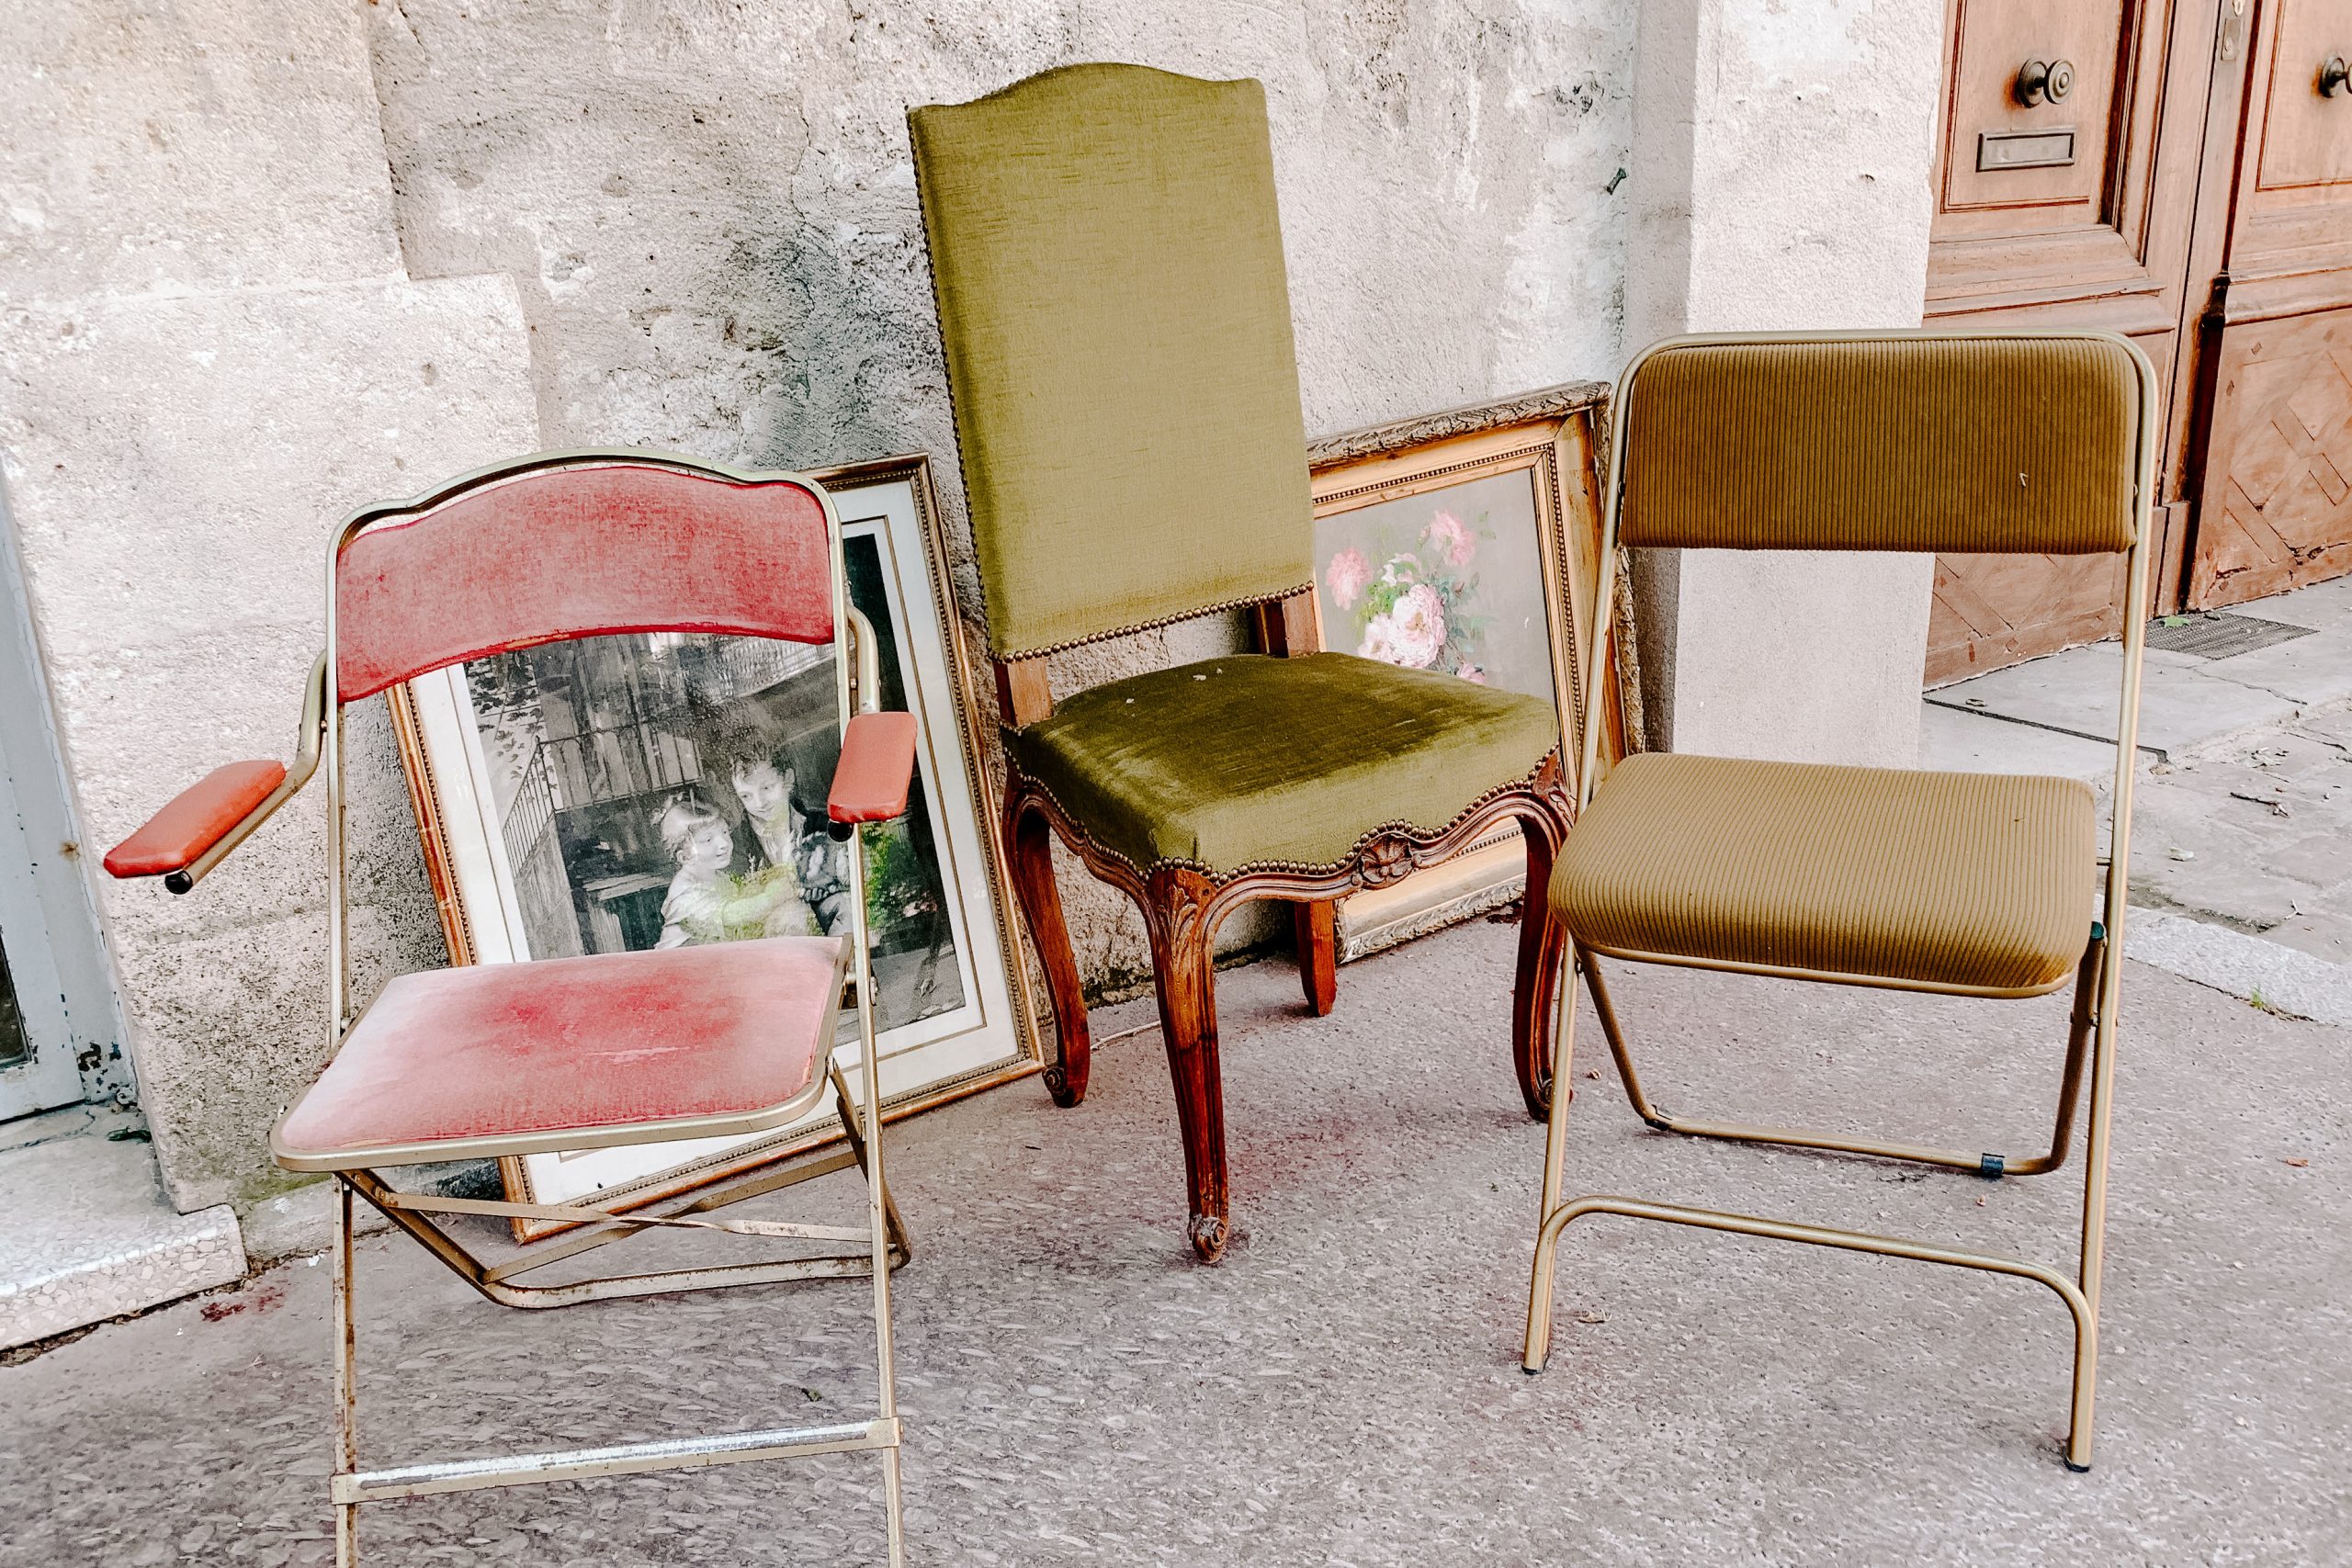 How to Care for Antique Furniture: Restoration, Repair and Reupholstering